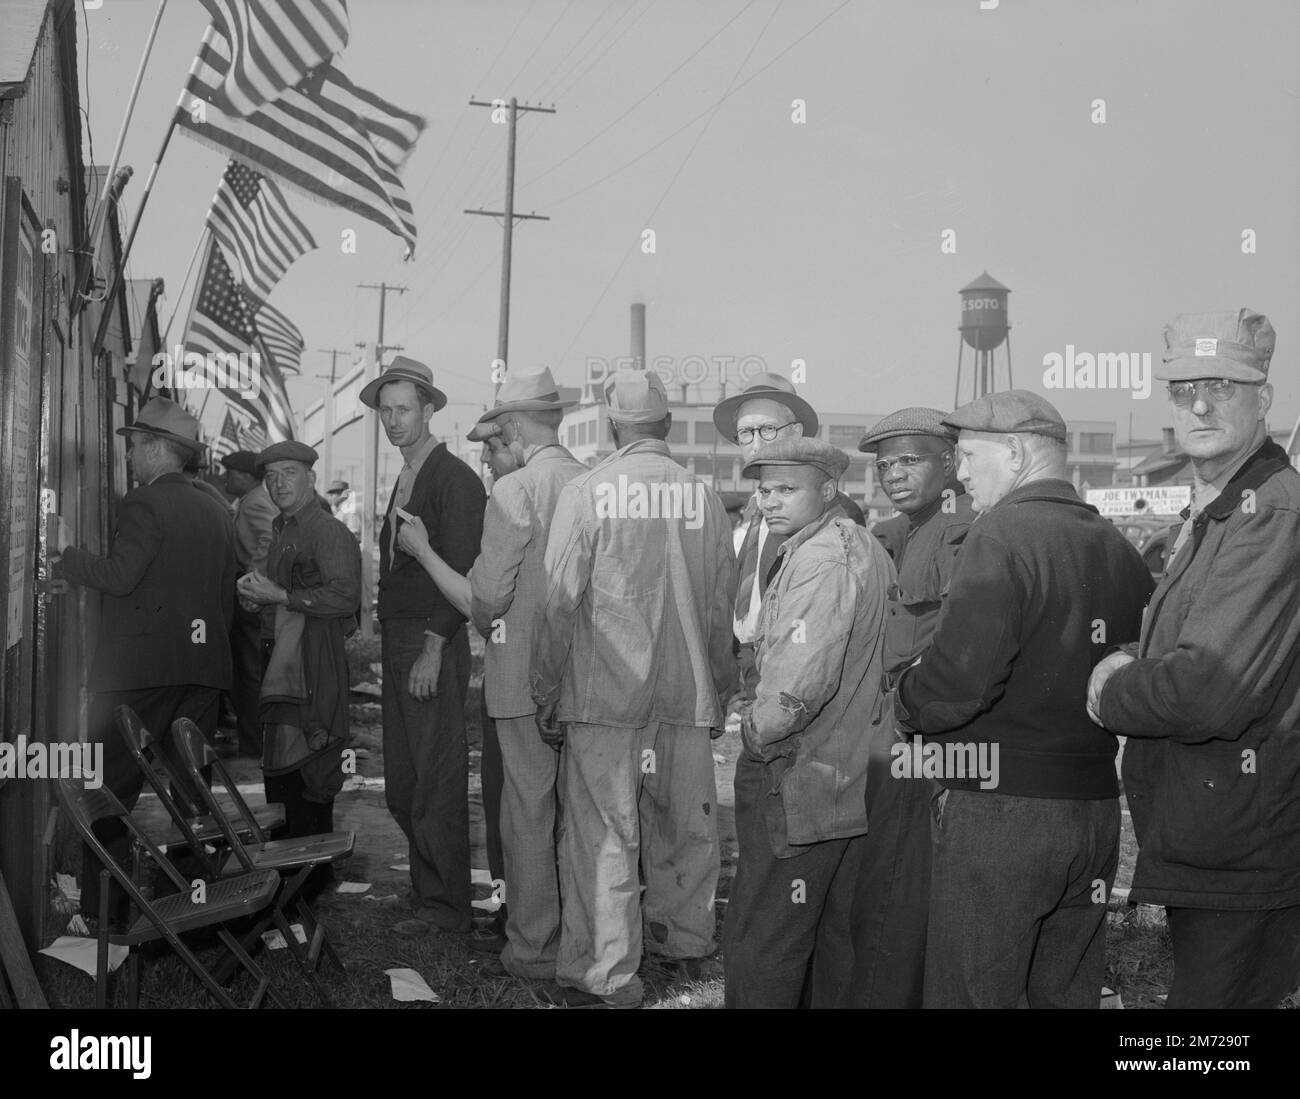 In Detroit, Michigan, 80,000 River Rouge Ford plant workers voted in the election of officers for the Ford Local 600, United Automobile Workers, Congress of Industrial Organizations. Siegel, Arthur S., photographer Circa 1942. Stock Photo